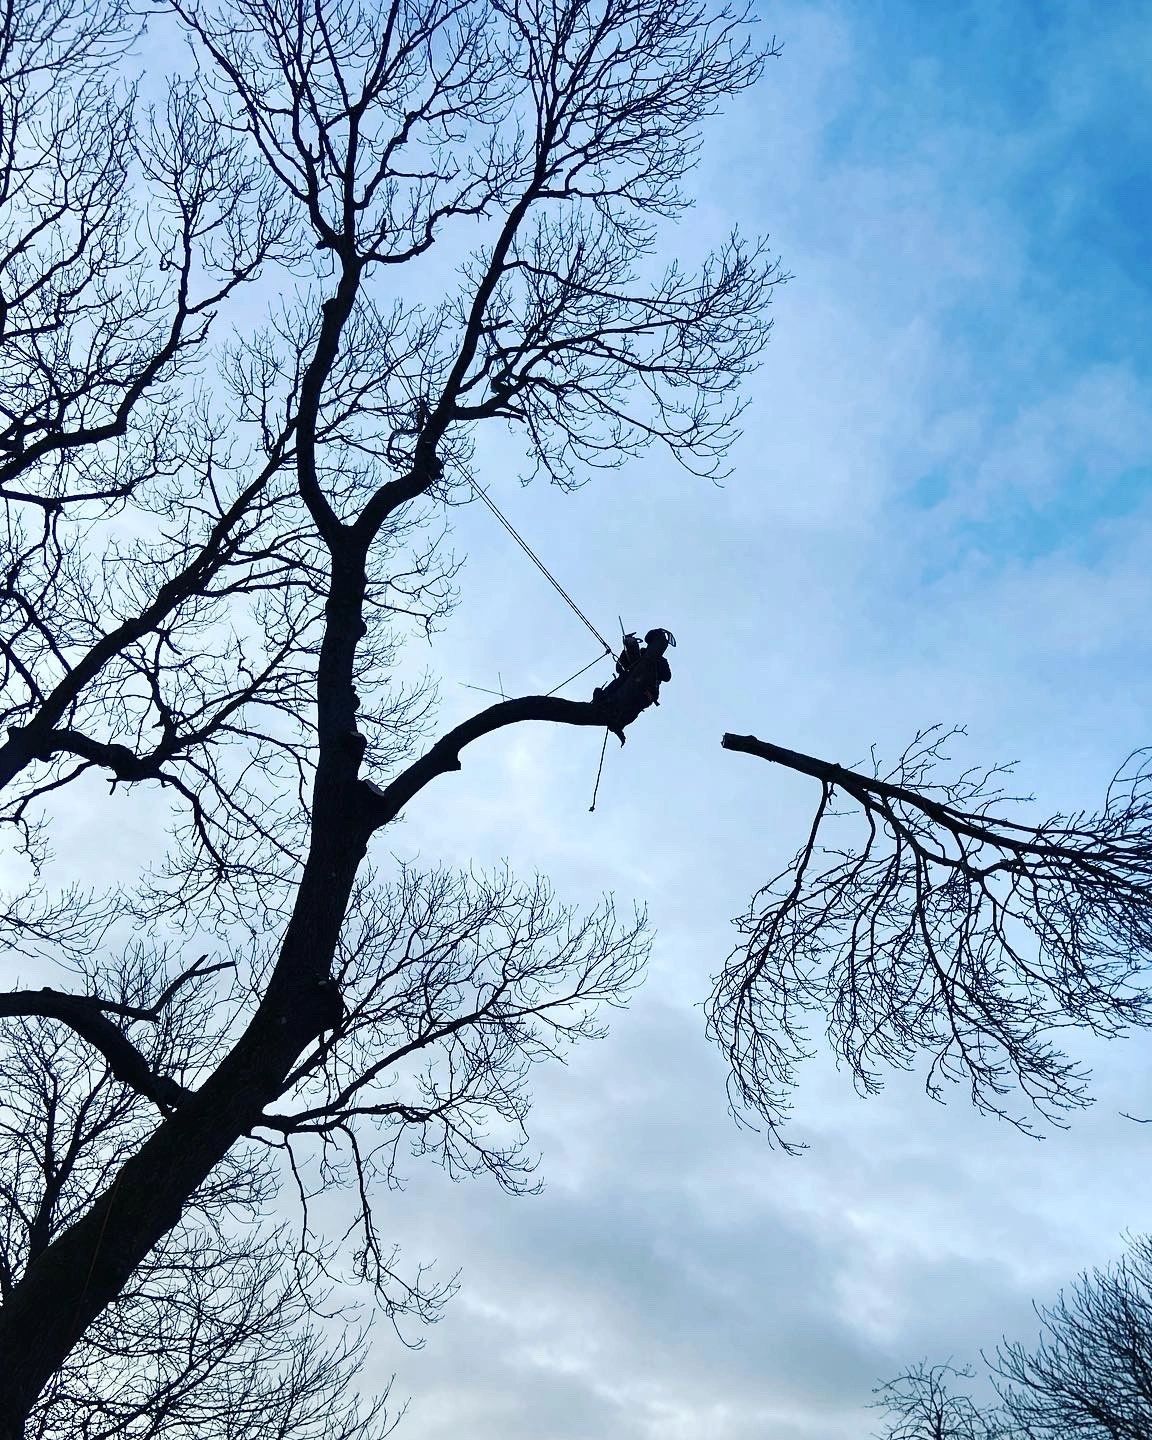 A tree climber removing a section from a mature Ash tree near Petersfield in Hampshire.
